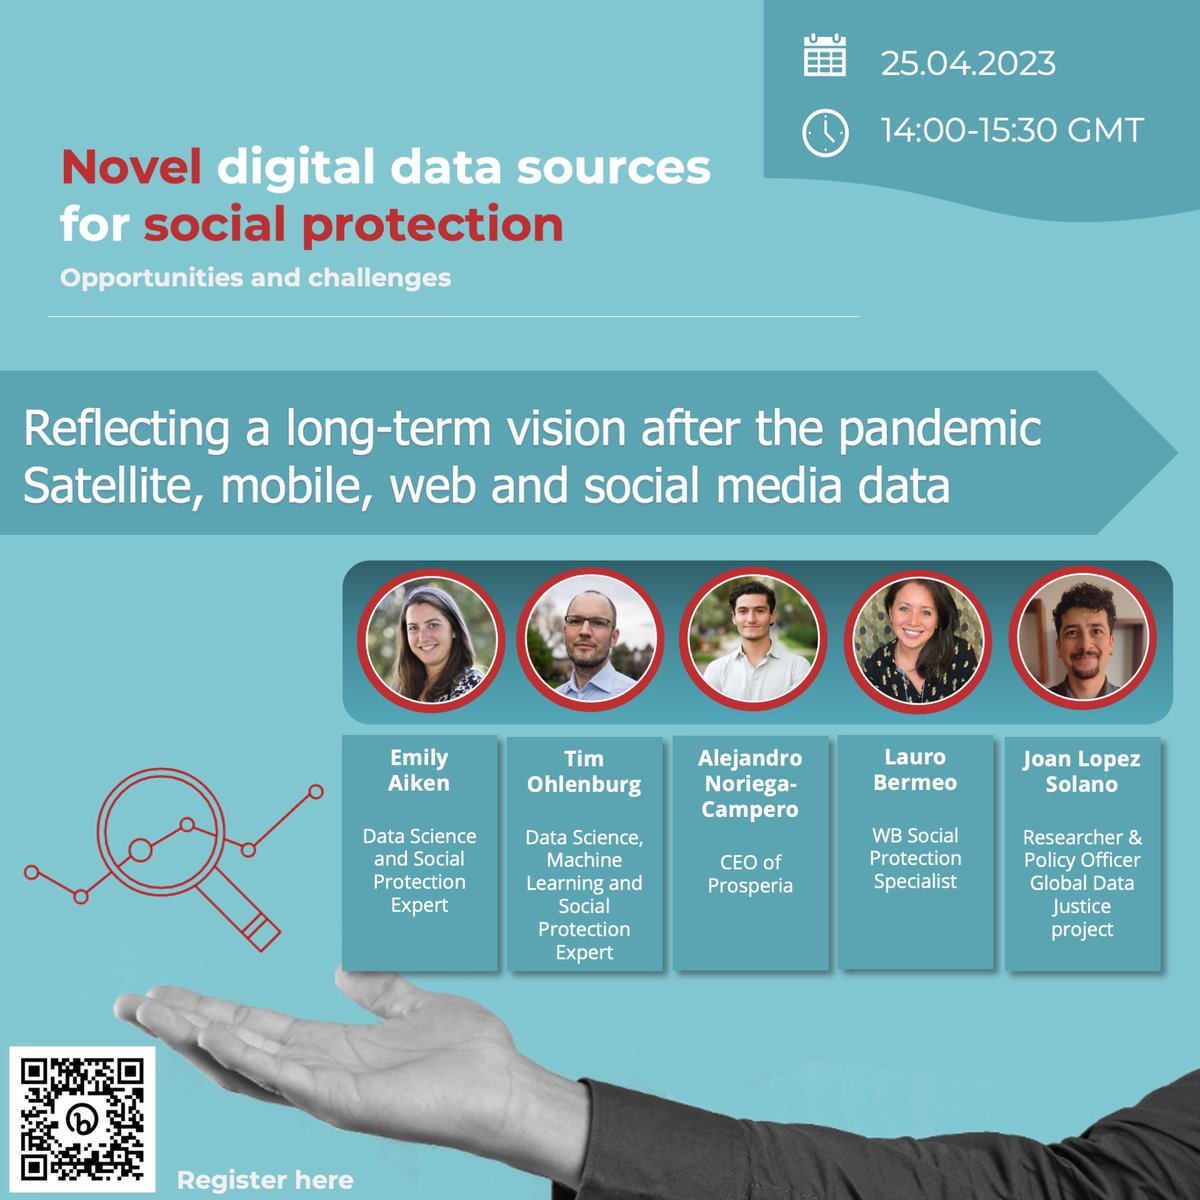 🌐 Apr 25: Dive into Novel Digital Data Sources for Social Protection! 💡 Experts discuss opportunities, challenges & ethical concerns. Register now: bit.ly/40odskb #Webinar #DigitalData #SocialProtection ✅🌟